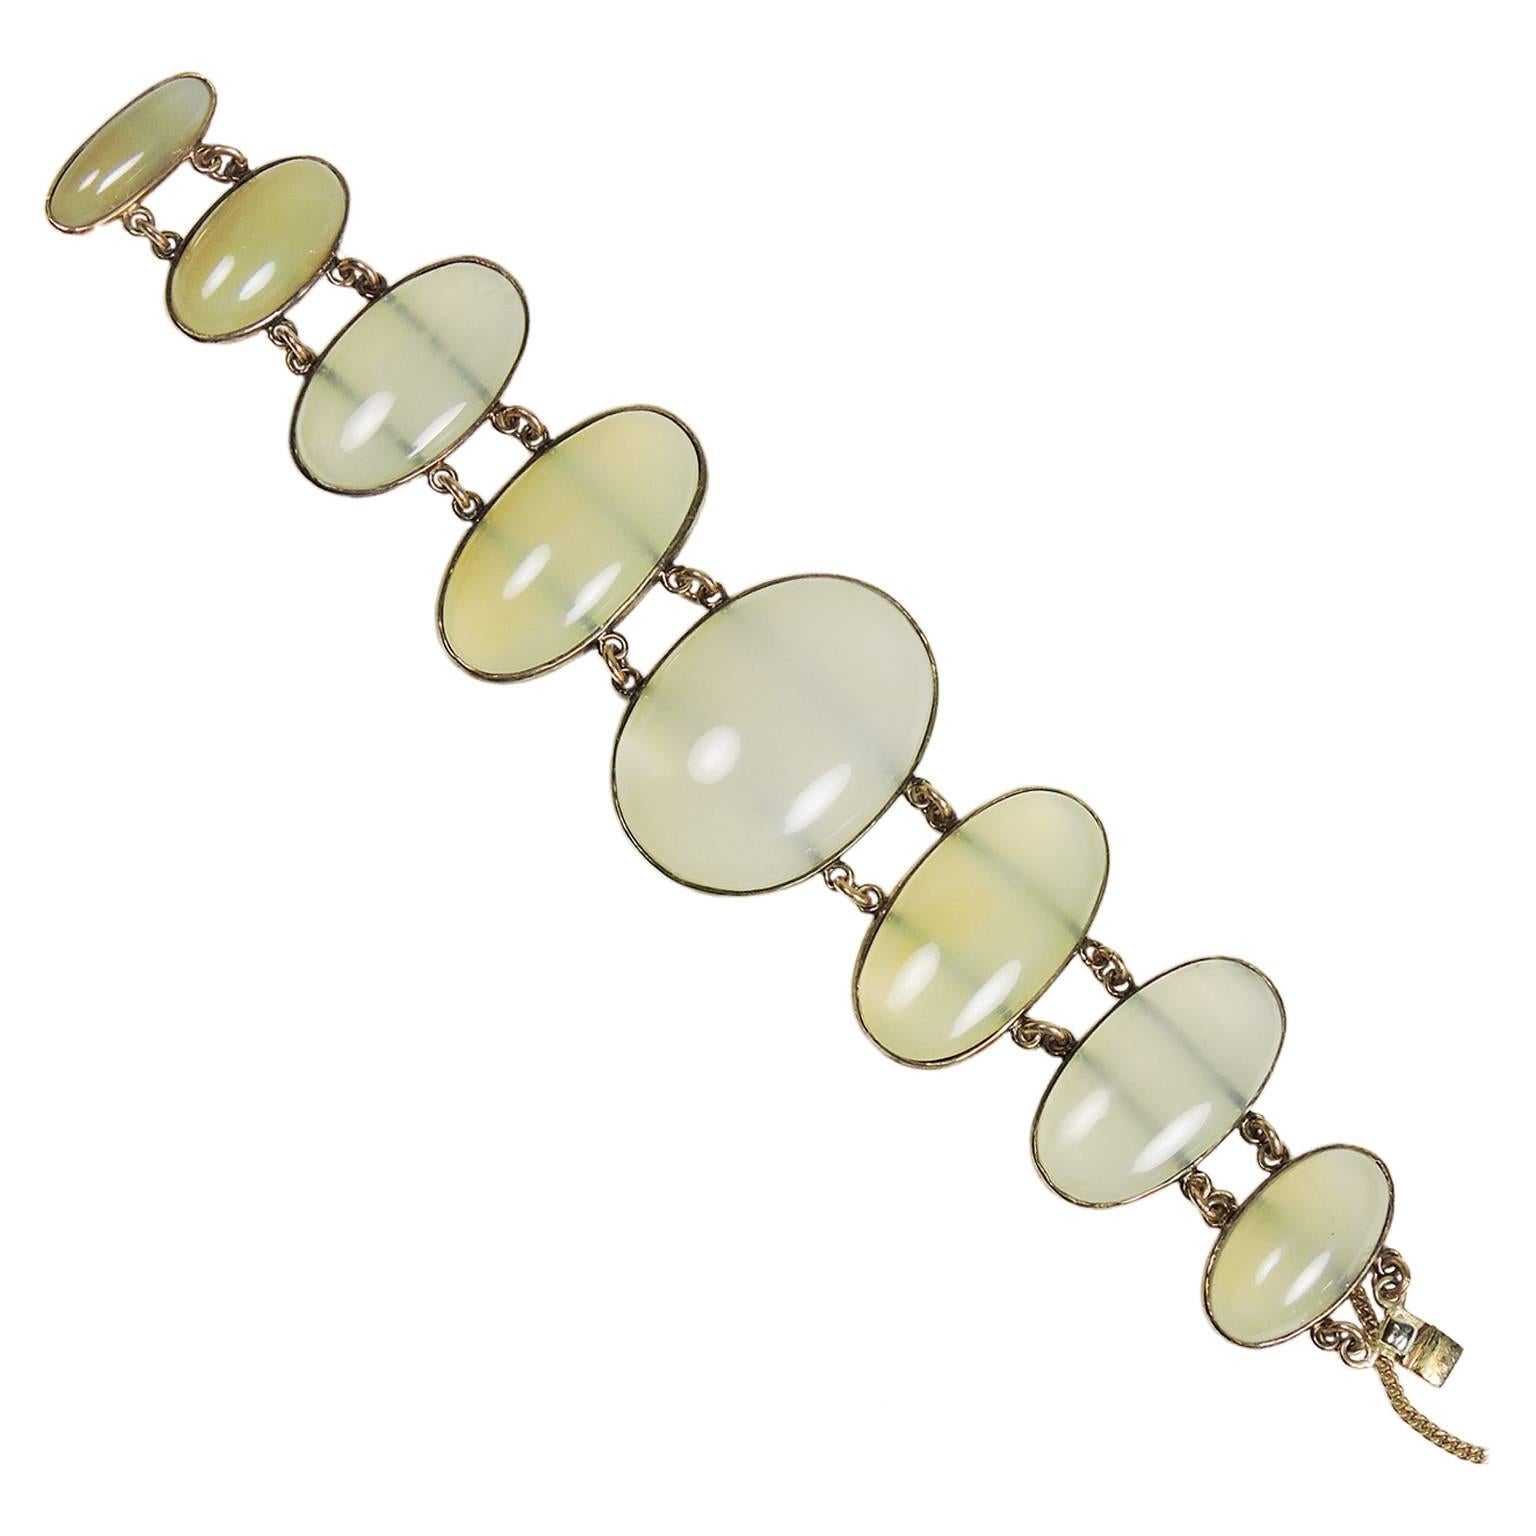 Vintage Graduated Transluscent White Cabochon Agate and Yellow Gold Bracelet 